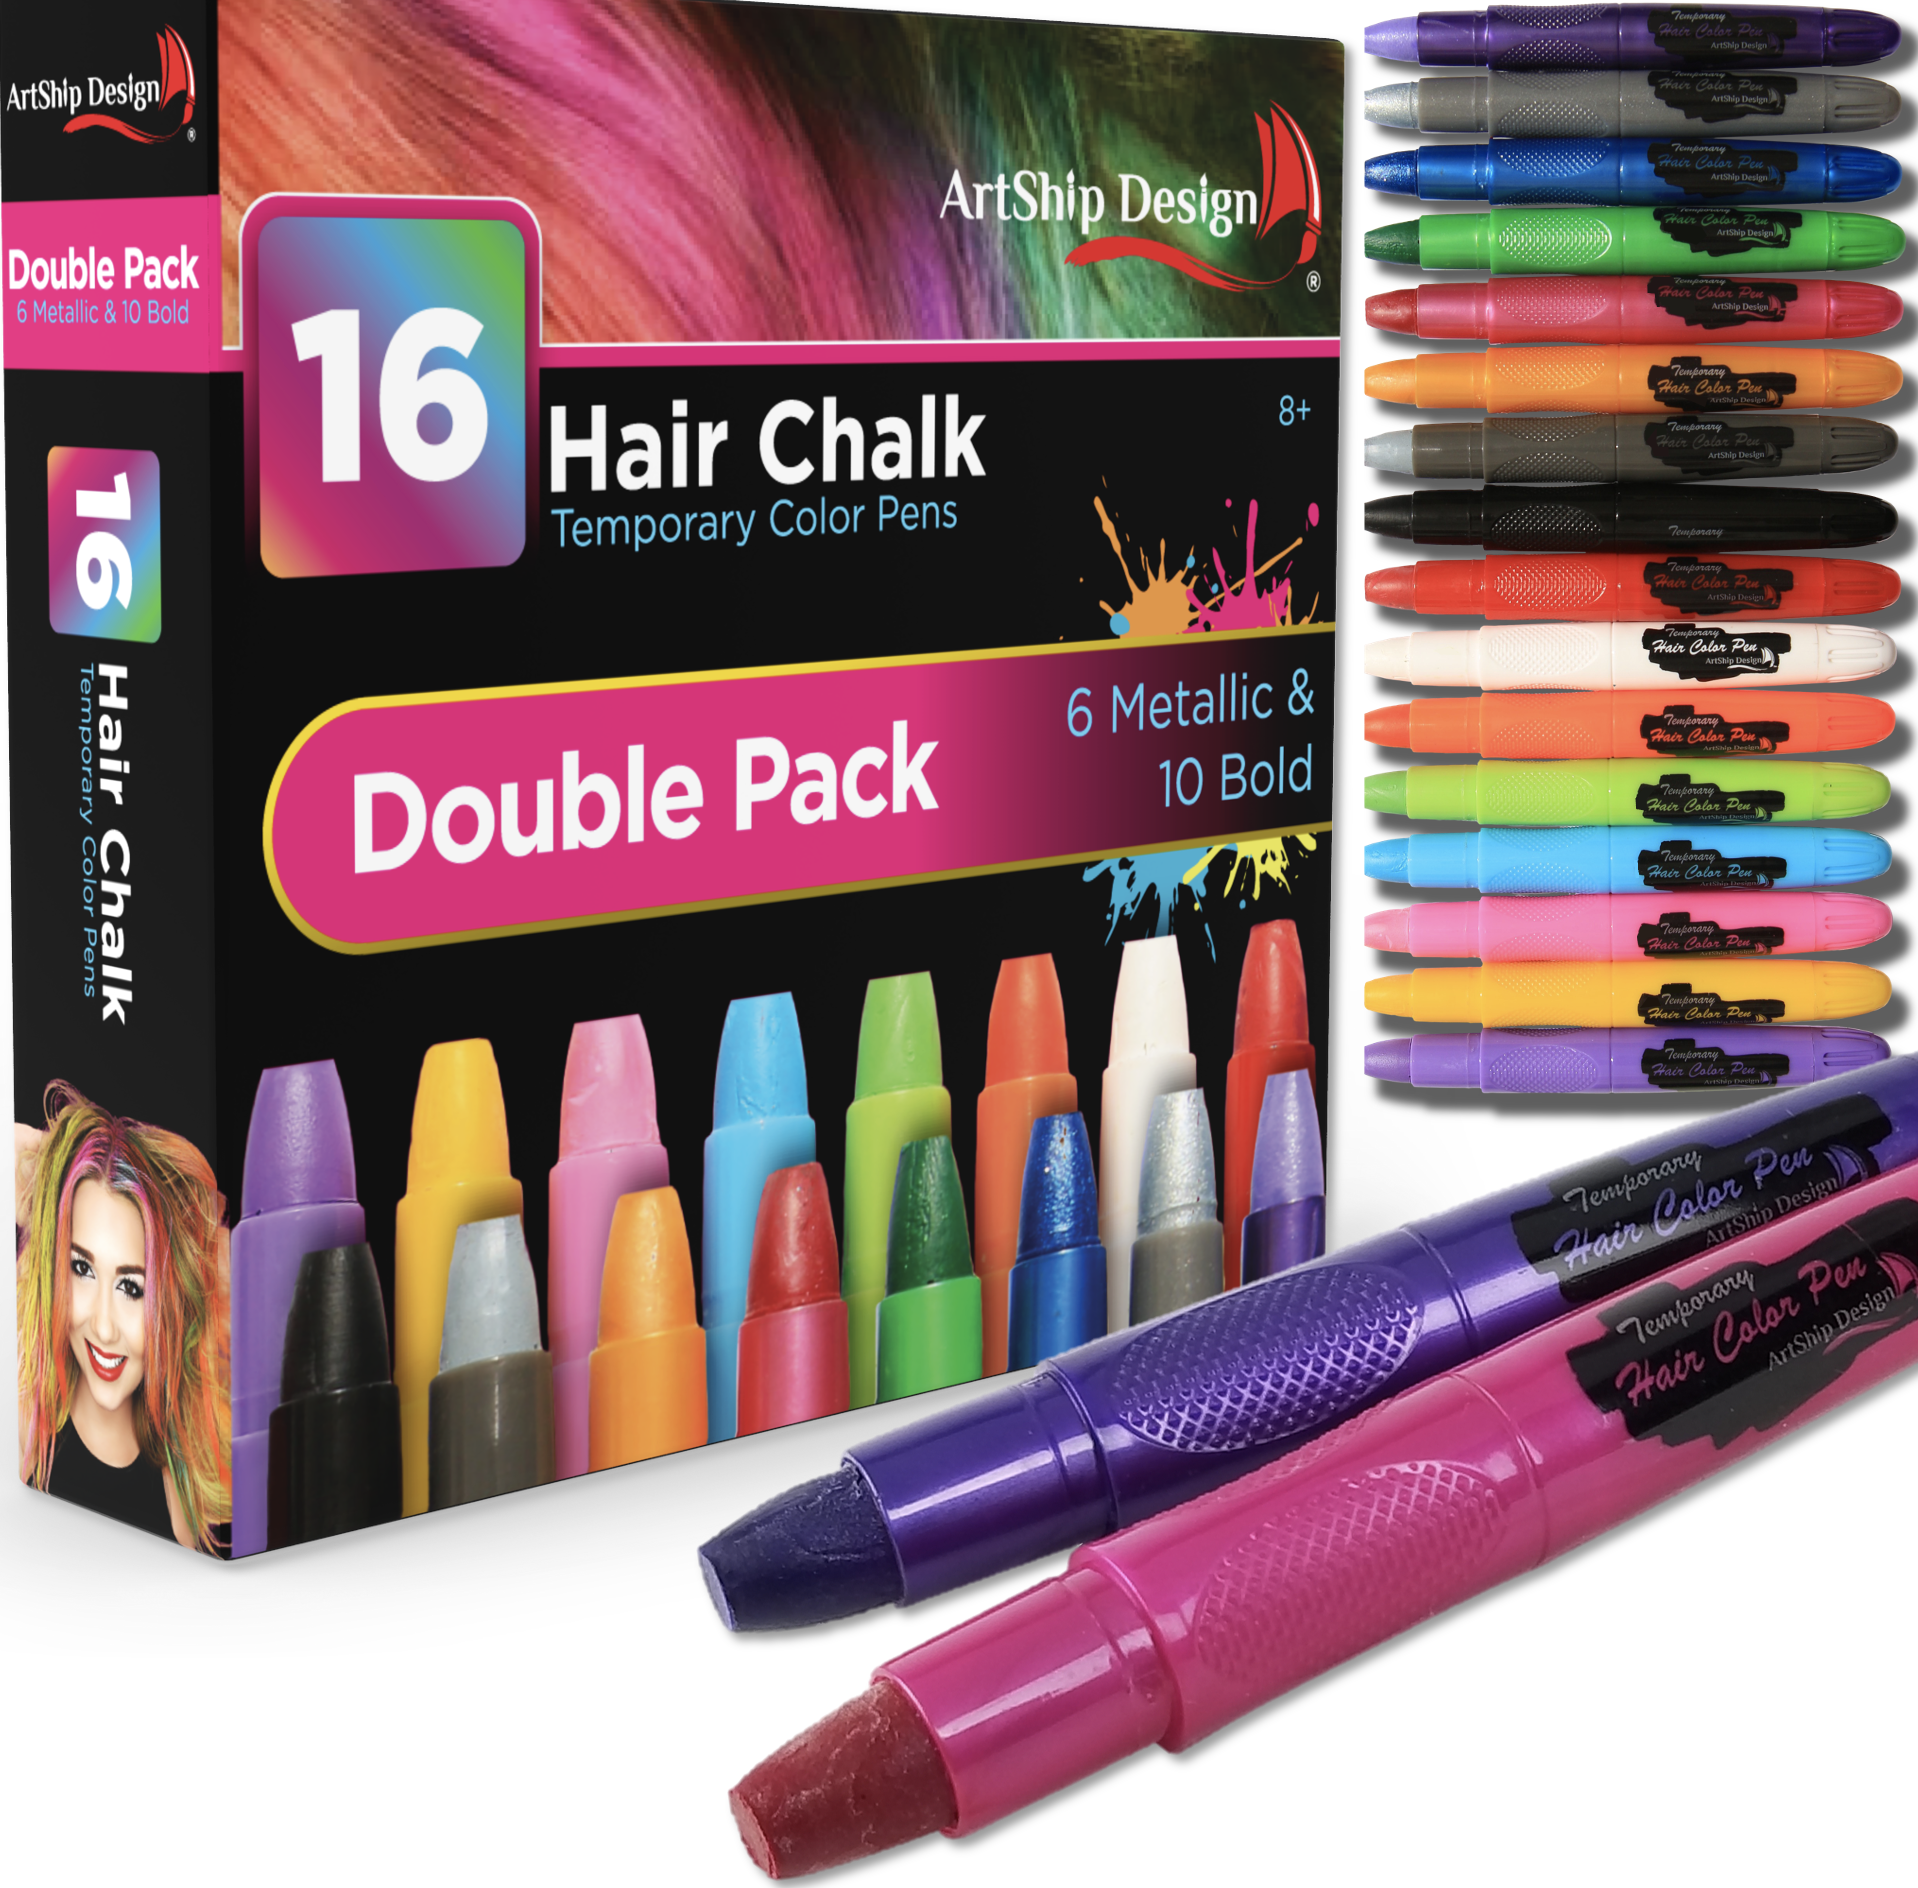 Hair Chalks for Kids Girls 12 Pack Metallic Glitter Temporary Hair Chalks Pens Gifts for Kids Hair Dyeing,Party,Christmas and Cosplay DIY 